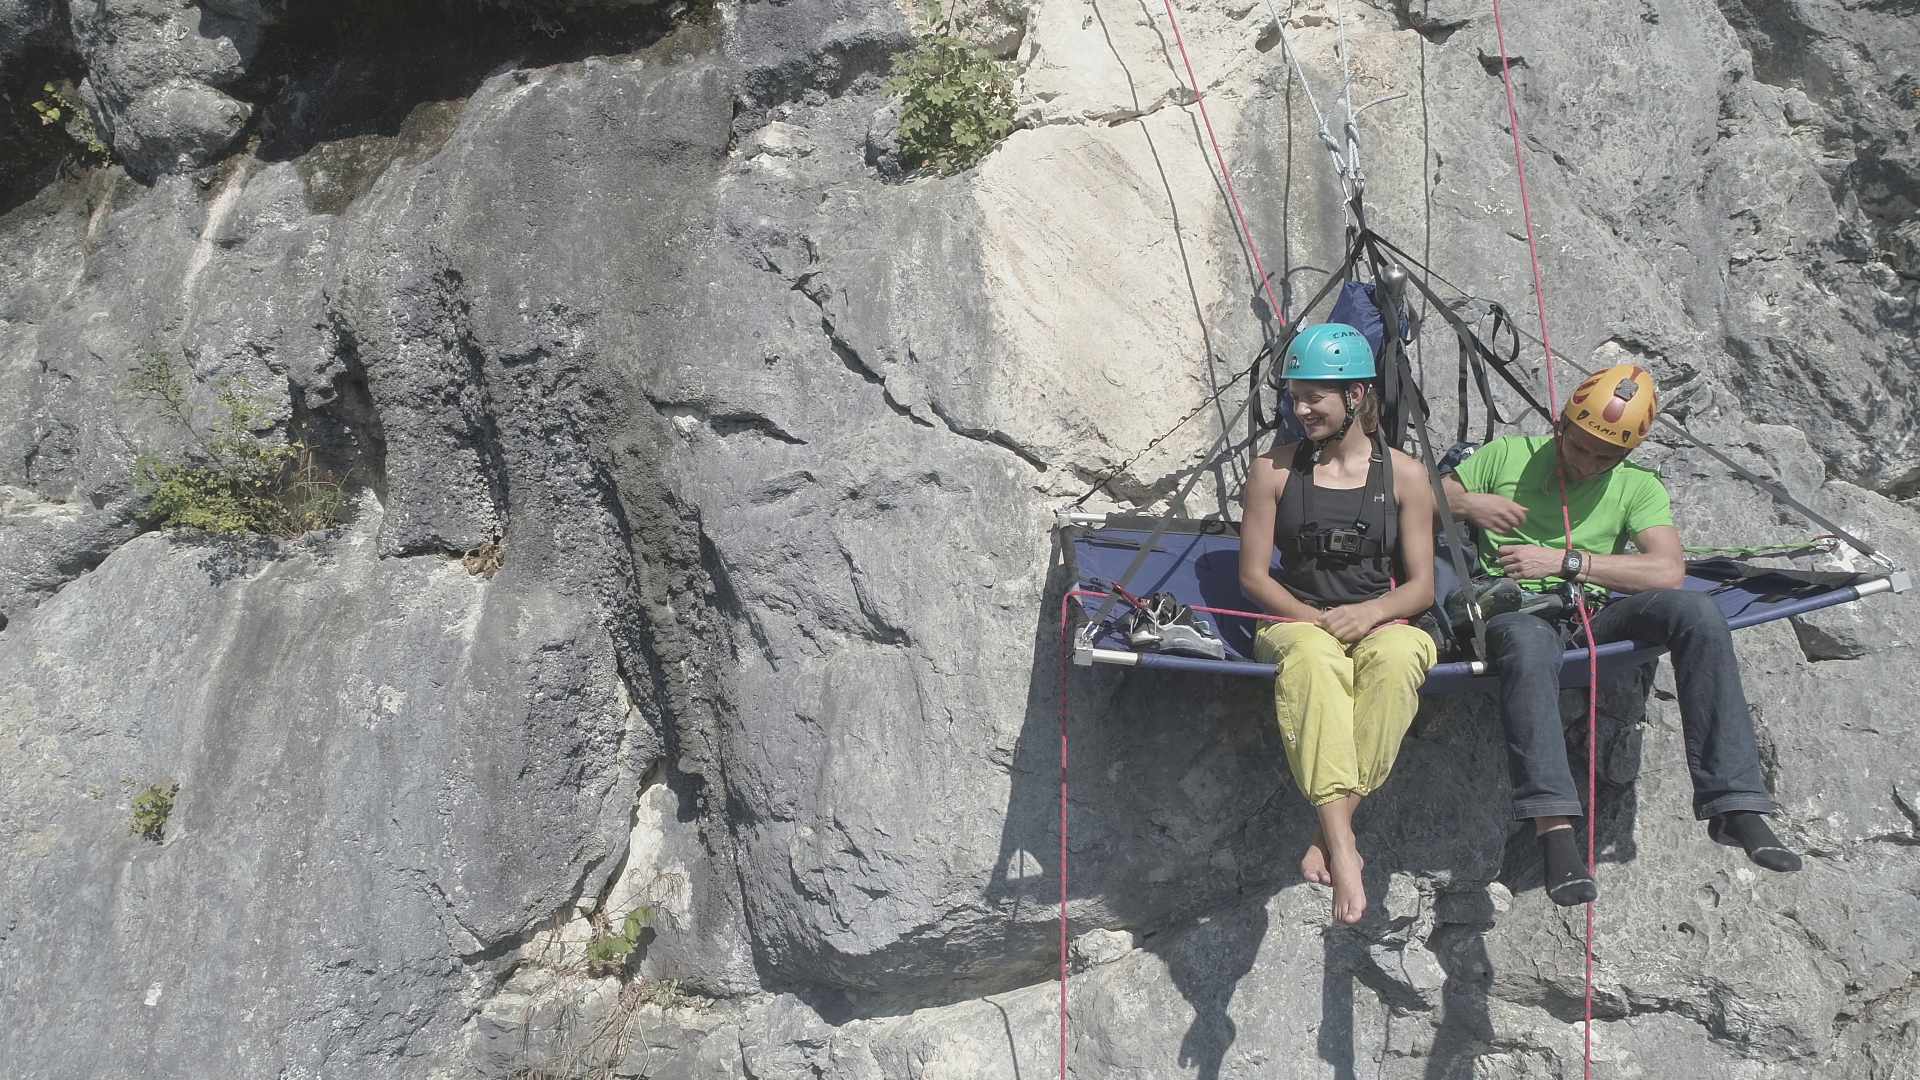 PortalEdge - unique adrenaline vertical camping high in a sheer cliff